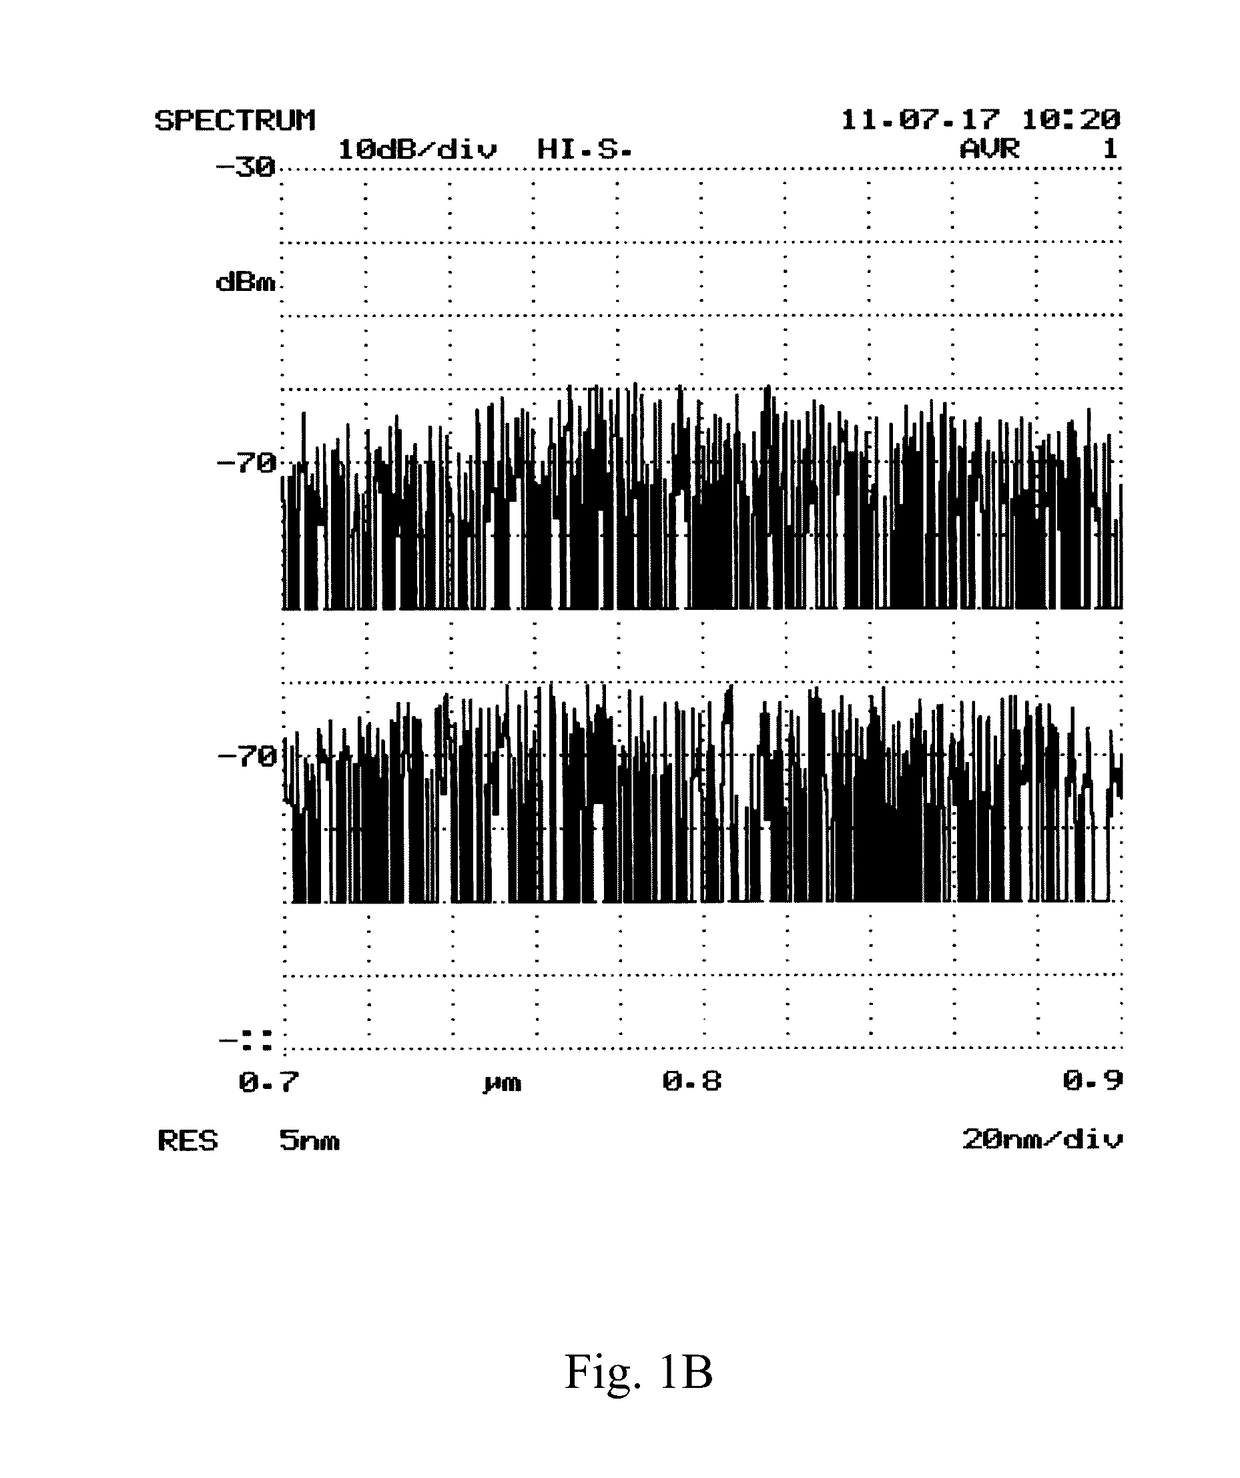 System and method for non-invasive glucose monitoring using near infrared spectroscopy